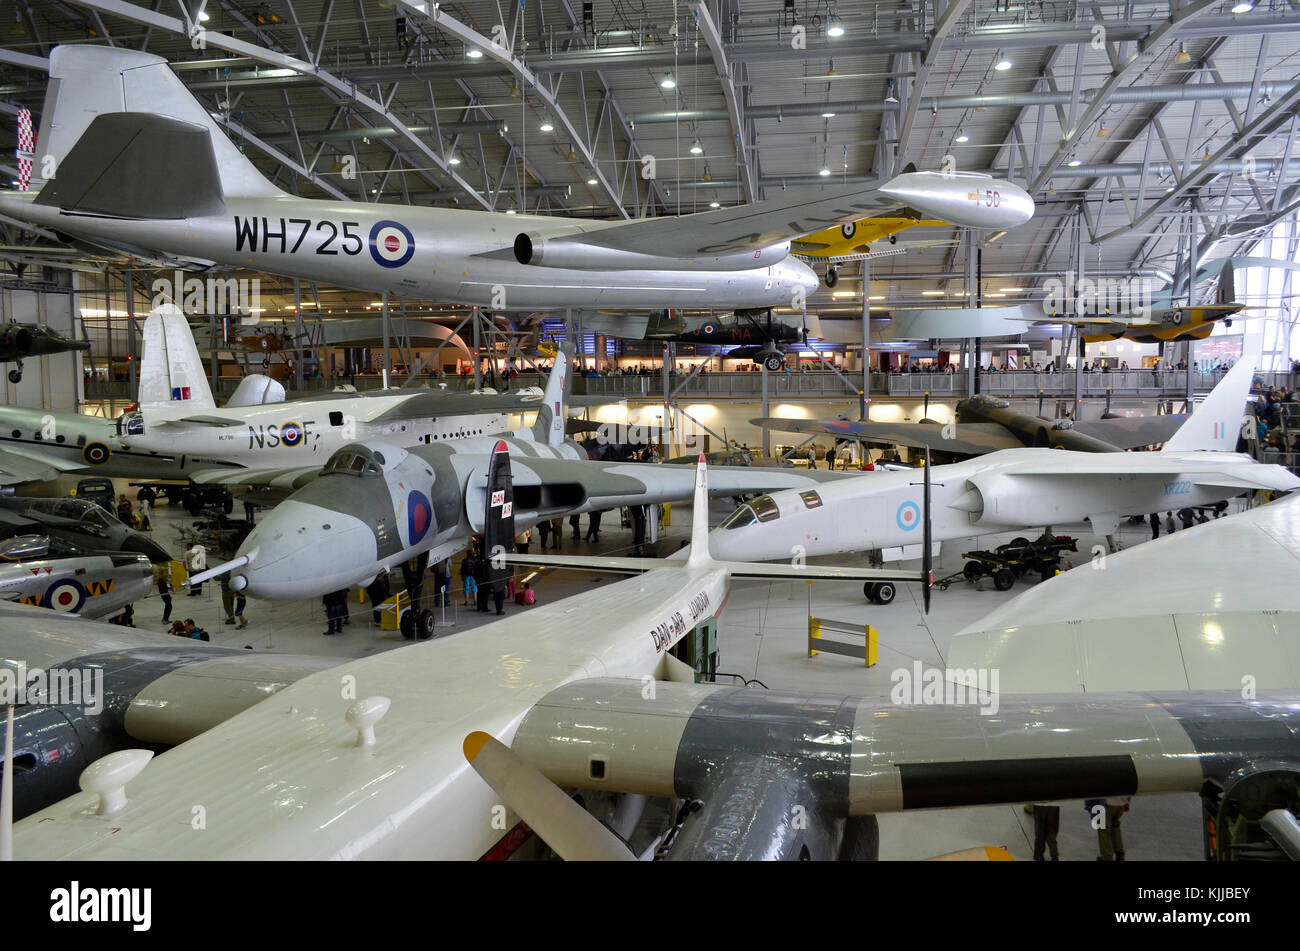 Duxford Airspace aircraft museum, Duxford, UK. English Electric  Canberra, Avro Vulcan, and BAC TSR 2 all visible. Stock Photo